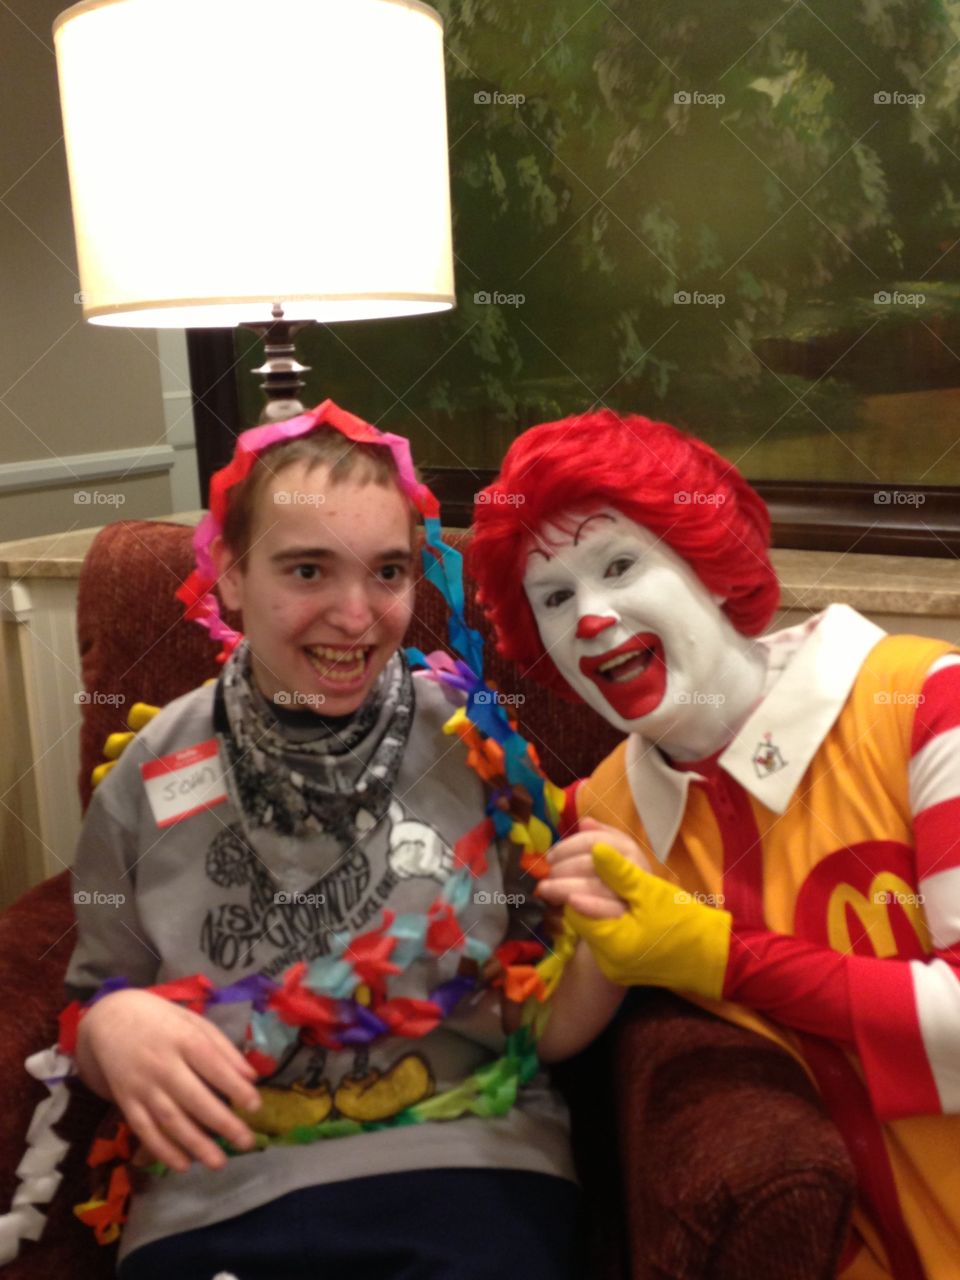 My son and Ronald McDonald. The Ronald McDonald House in Chicago.  My son is a challenged child and was thrilled when he met Ronald McDonald.